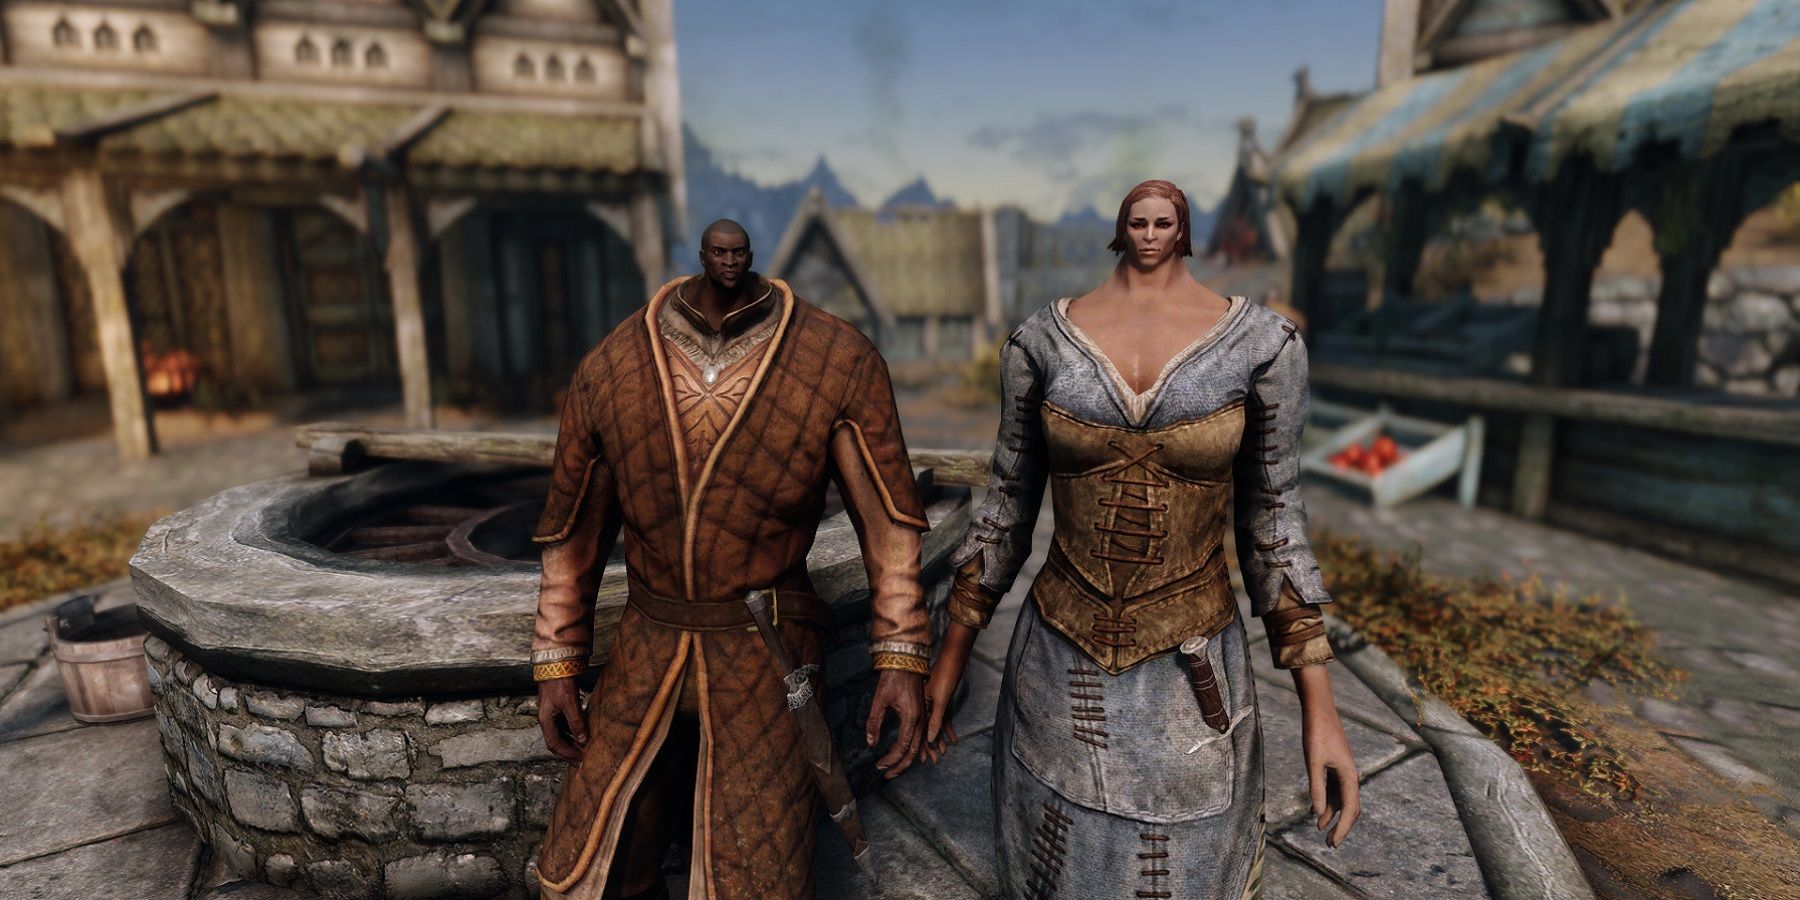 Image from Skyrim showing two characters, including Nazeem, with tiny heads.